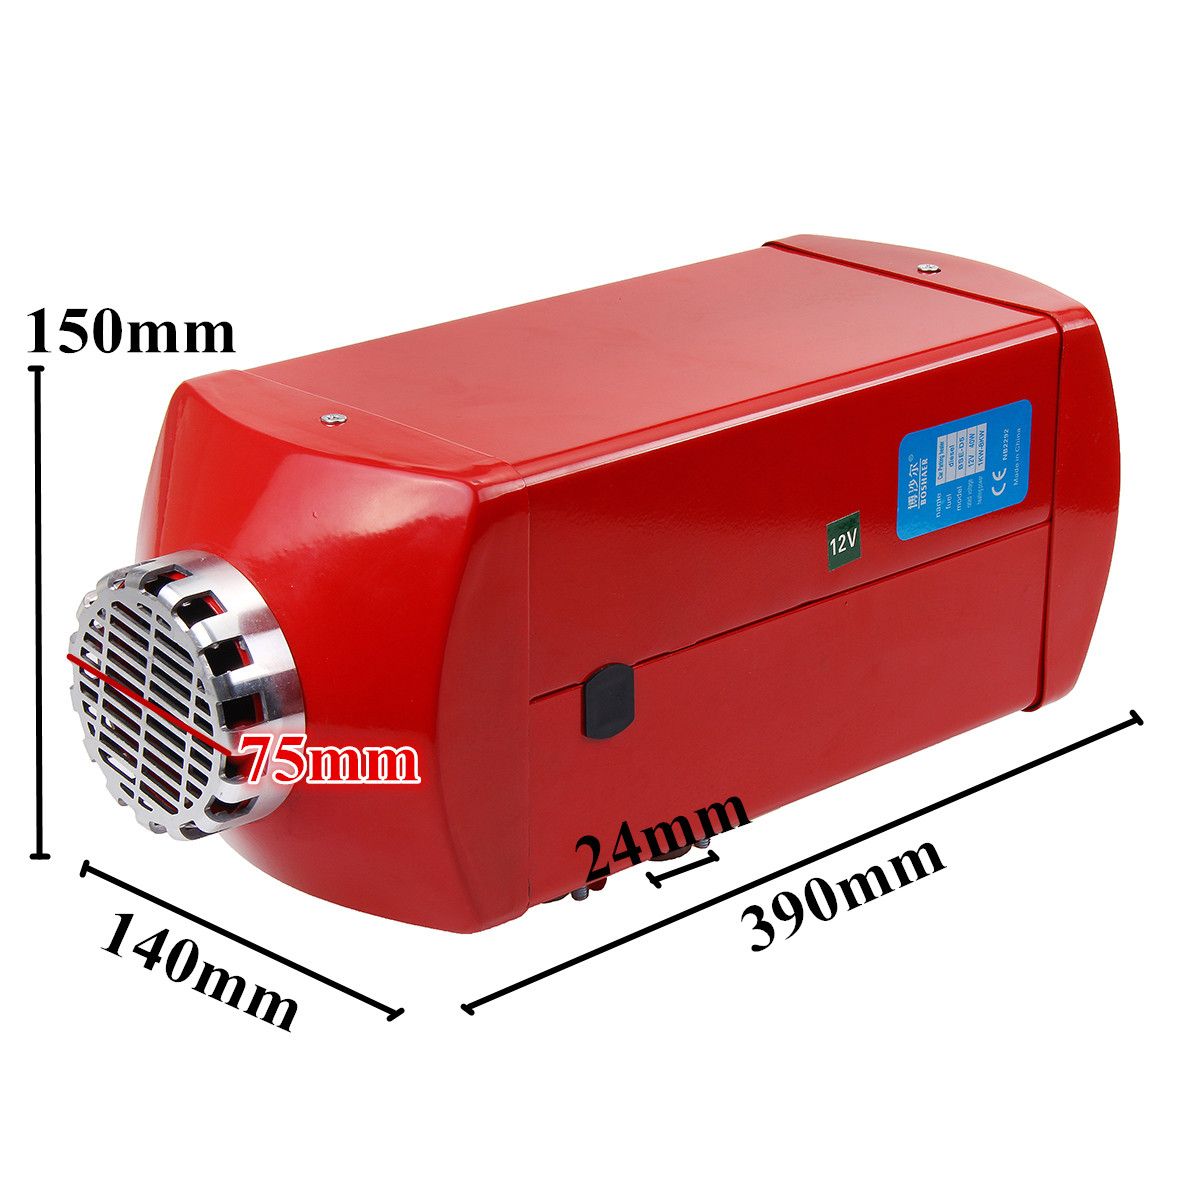 8000W-12V-Air-Diesel-Parking-Heater-Metal-Remote-Thermostat-For-Trucks-Boat-Car-Trailer-1597927